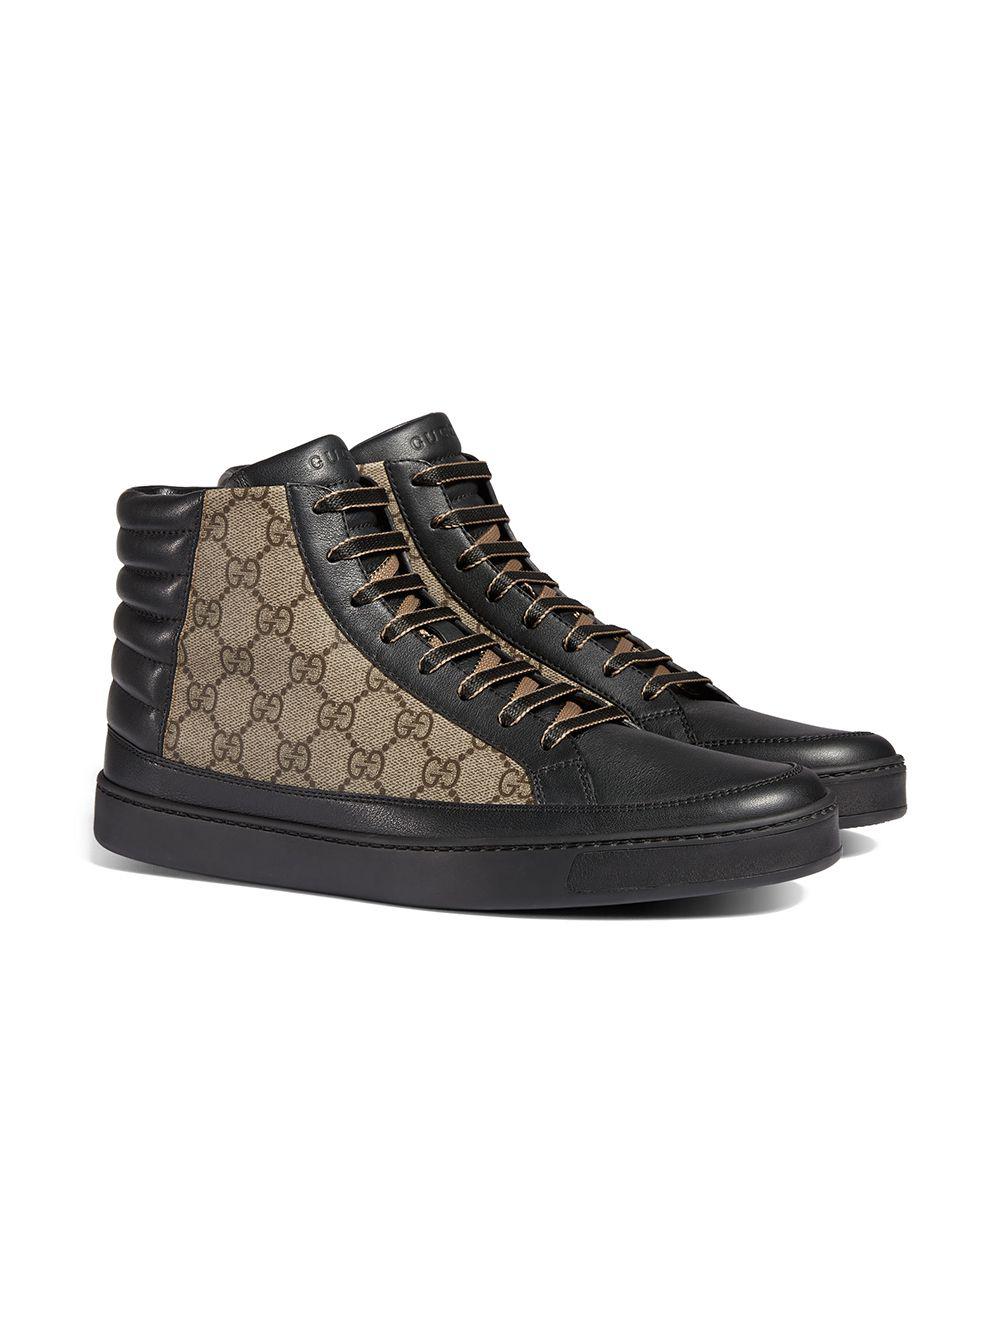 Gucci Canvas GG Supreme High-top Sneaker in Black for Men - Lyst